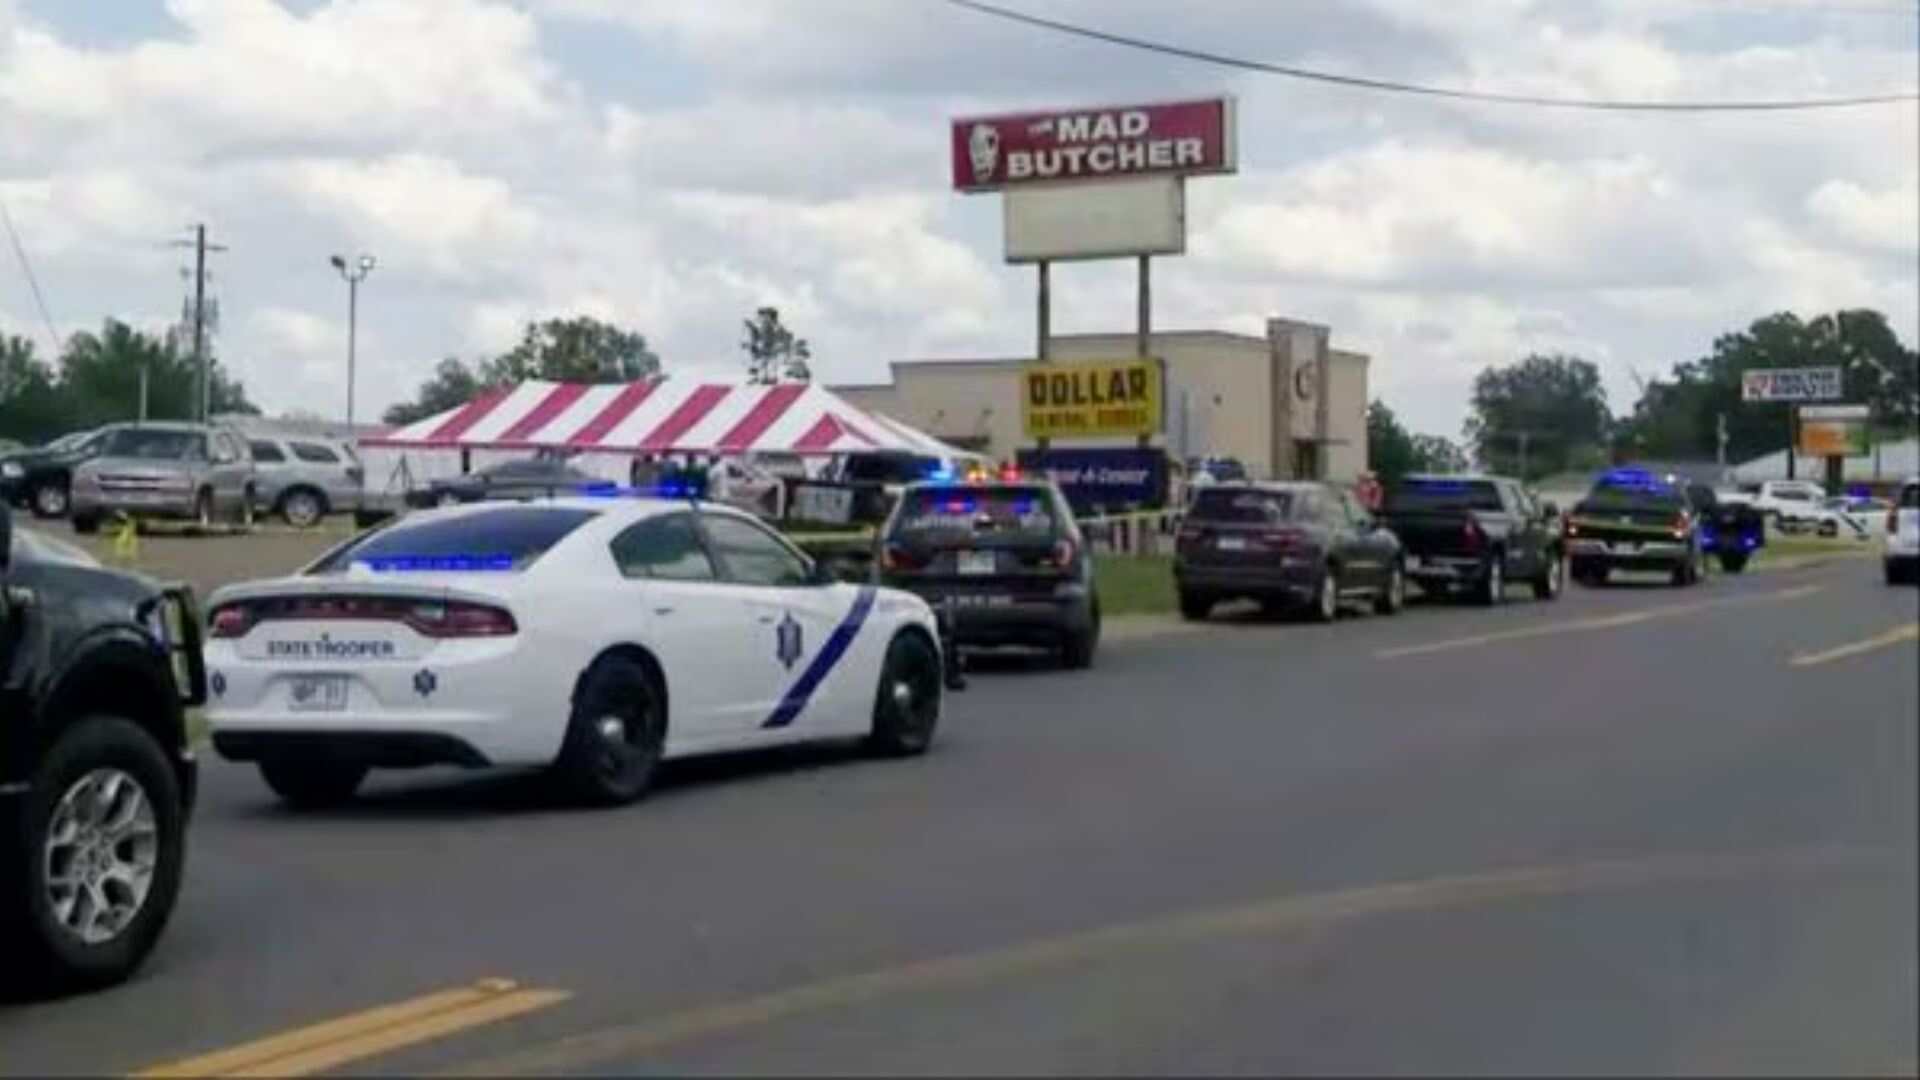 USA: Man Opens Fire At Supermarket In Arkansas, Arrested